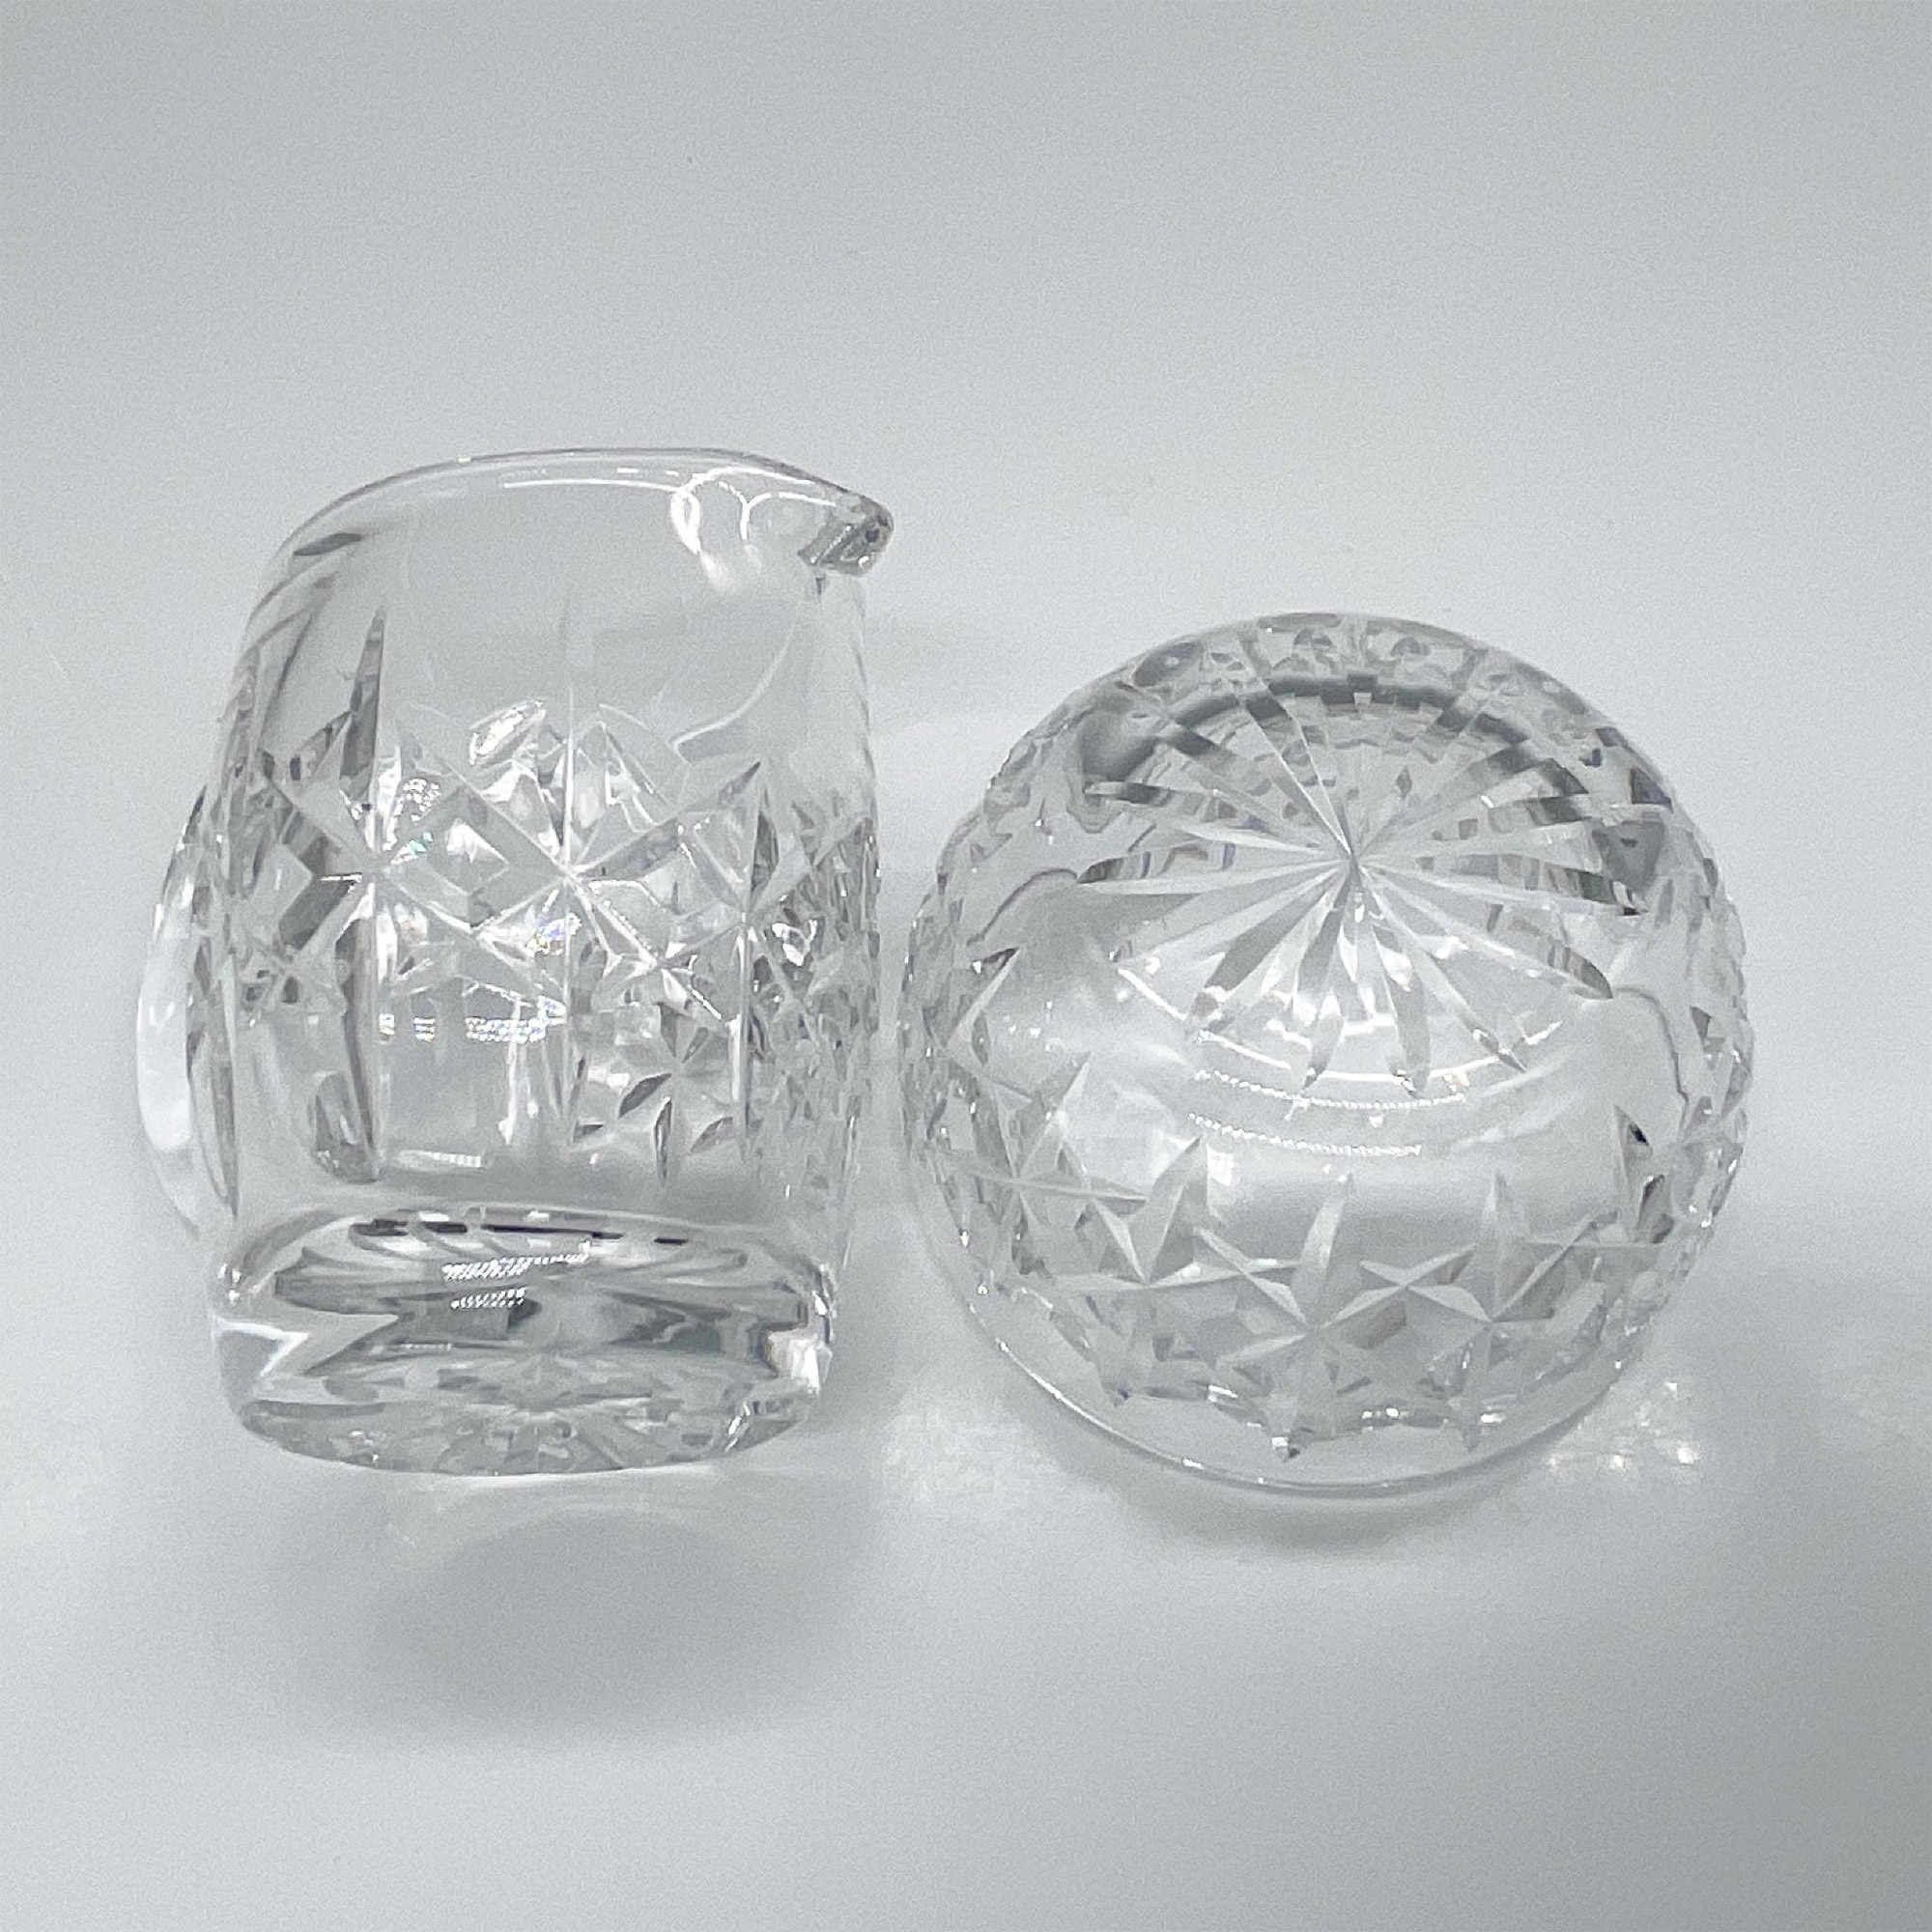 2pc Waterford Crystal Bowl & Small Pitcher - Image 3 of 3